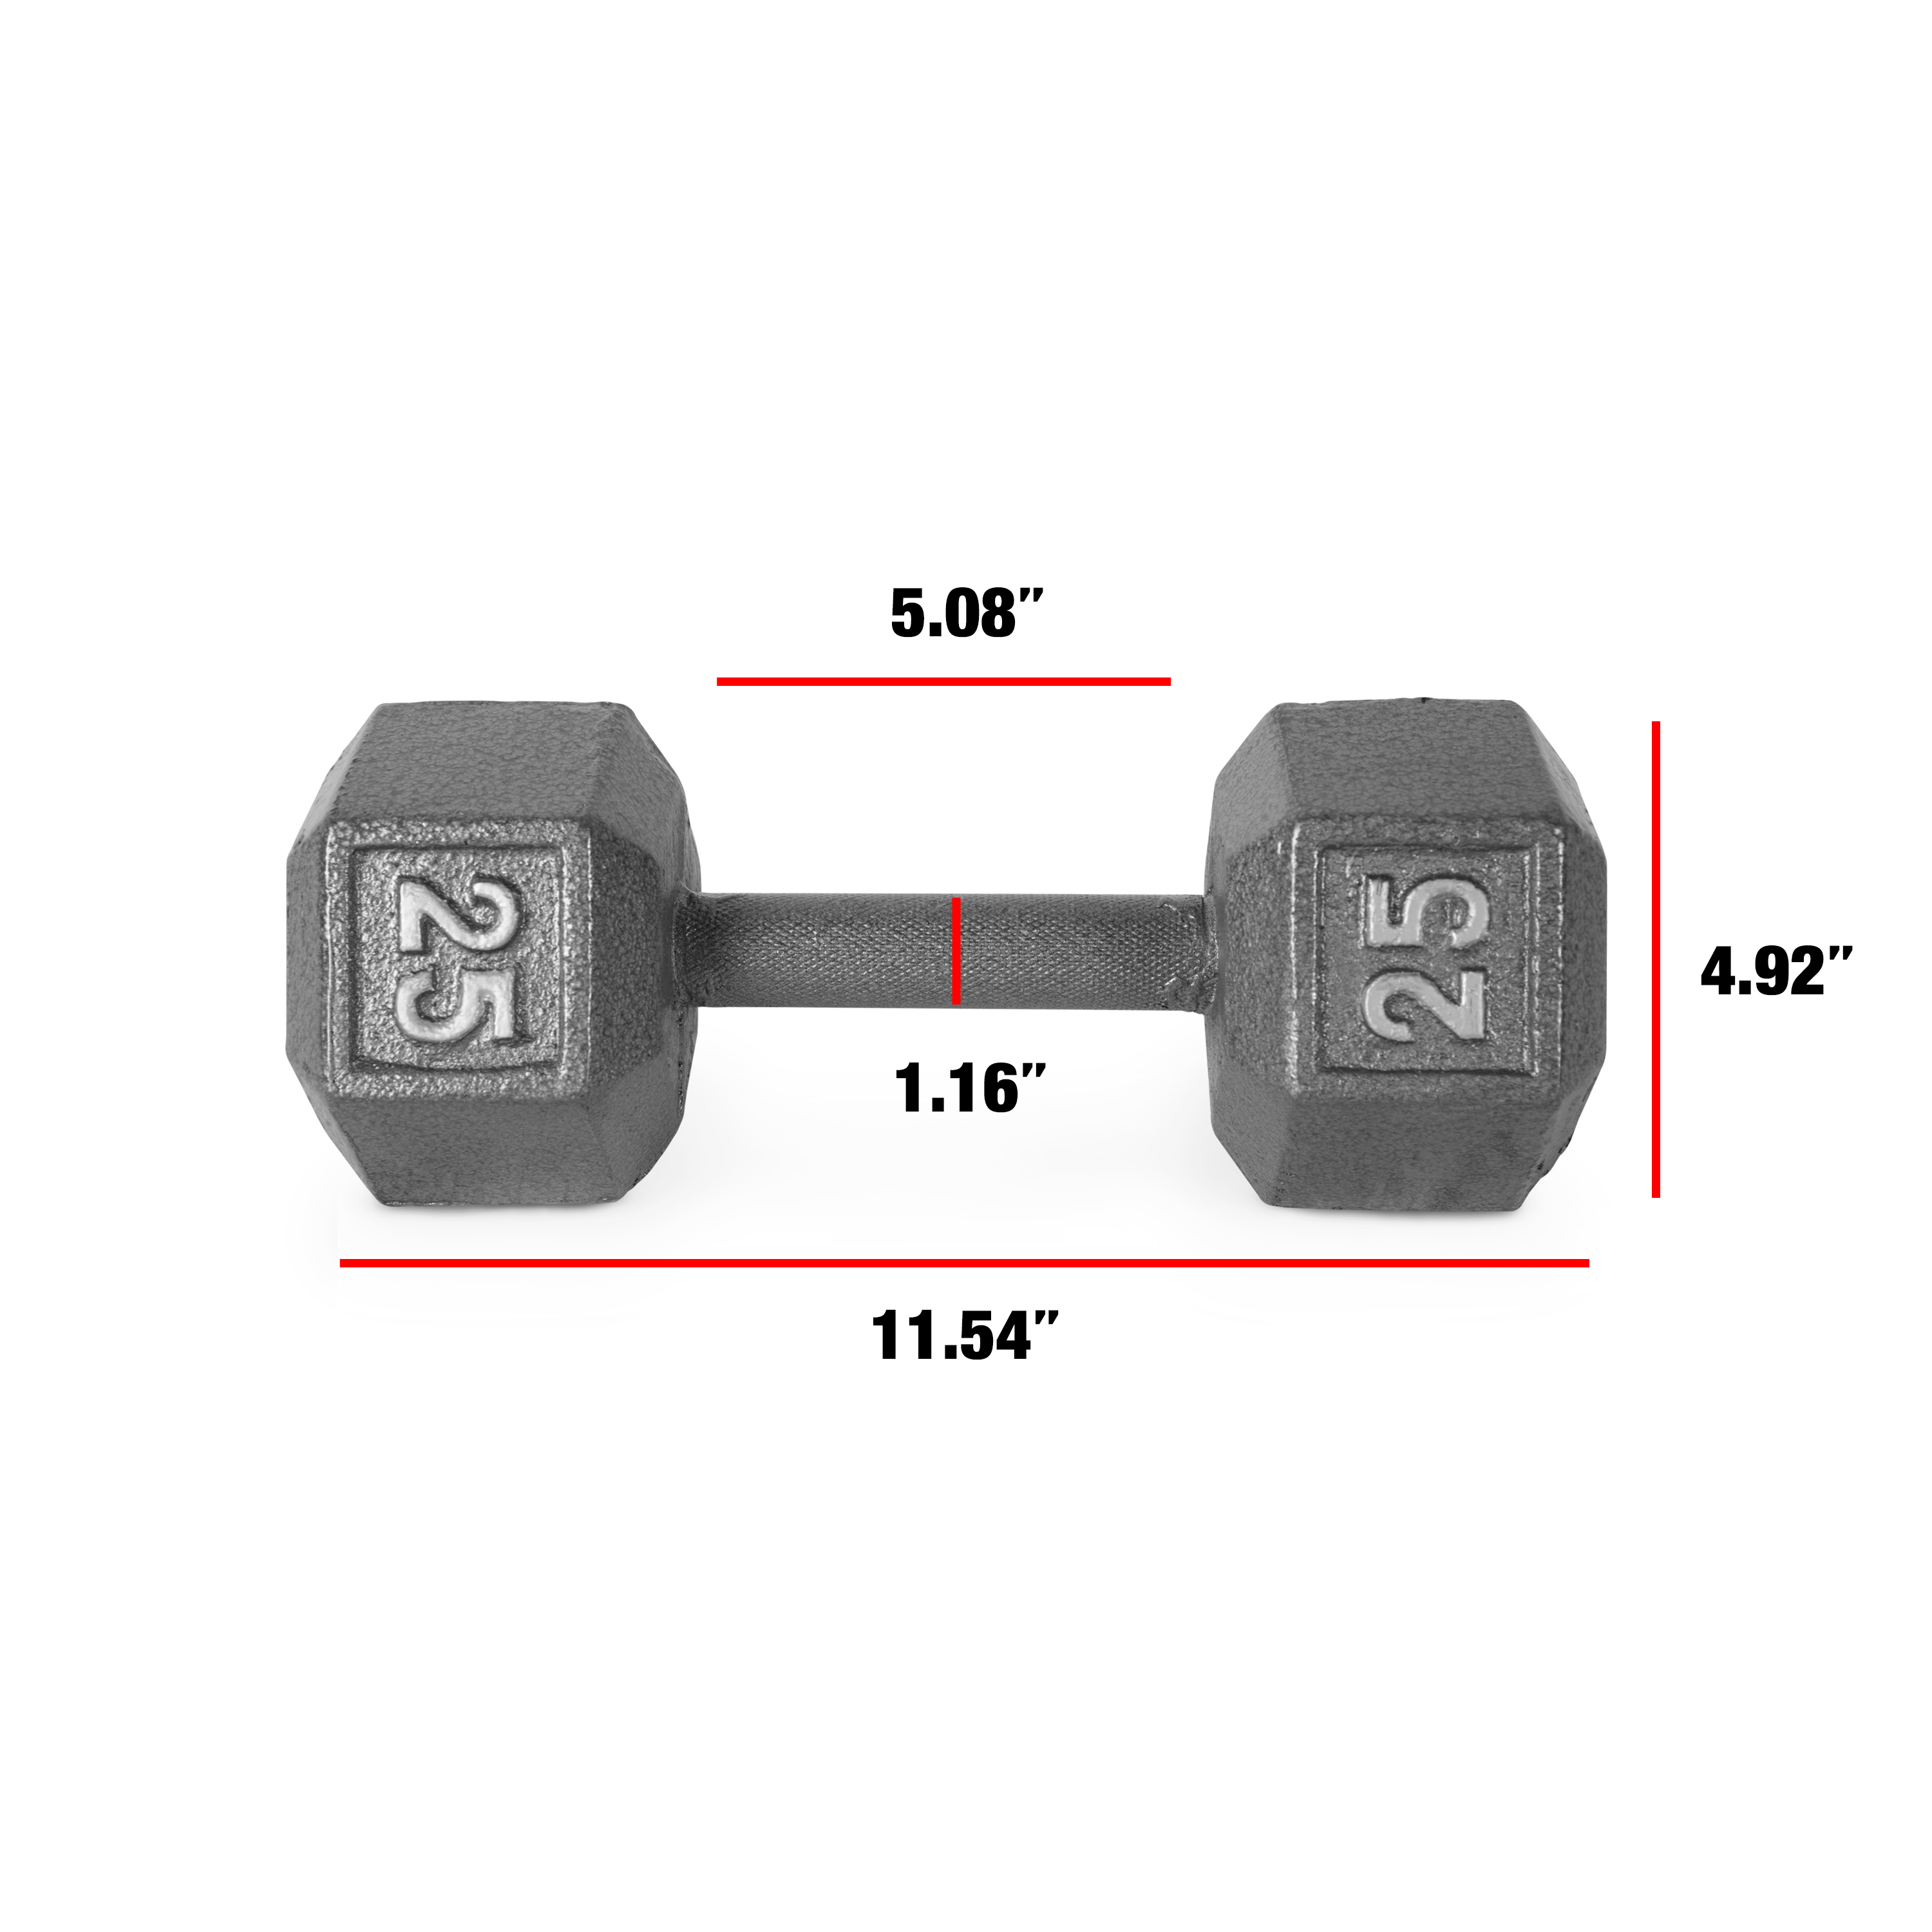 CAP Barbell 25lb Cast Iron Hex Dumbbell, Single - image 4 of 6